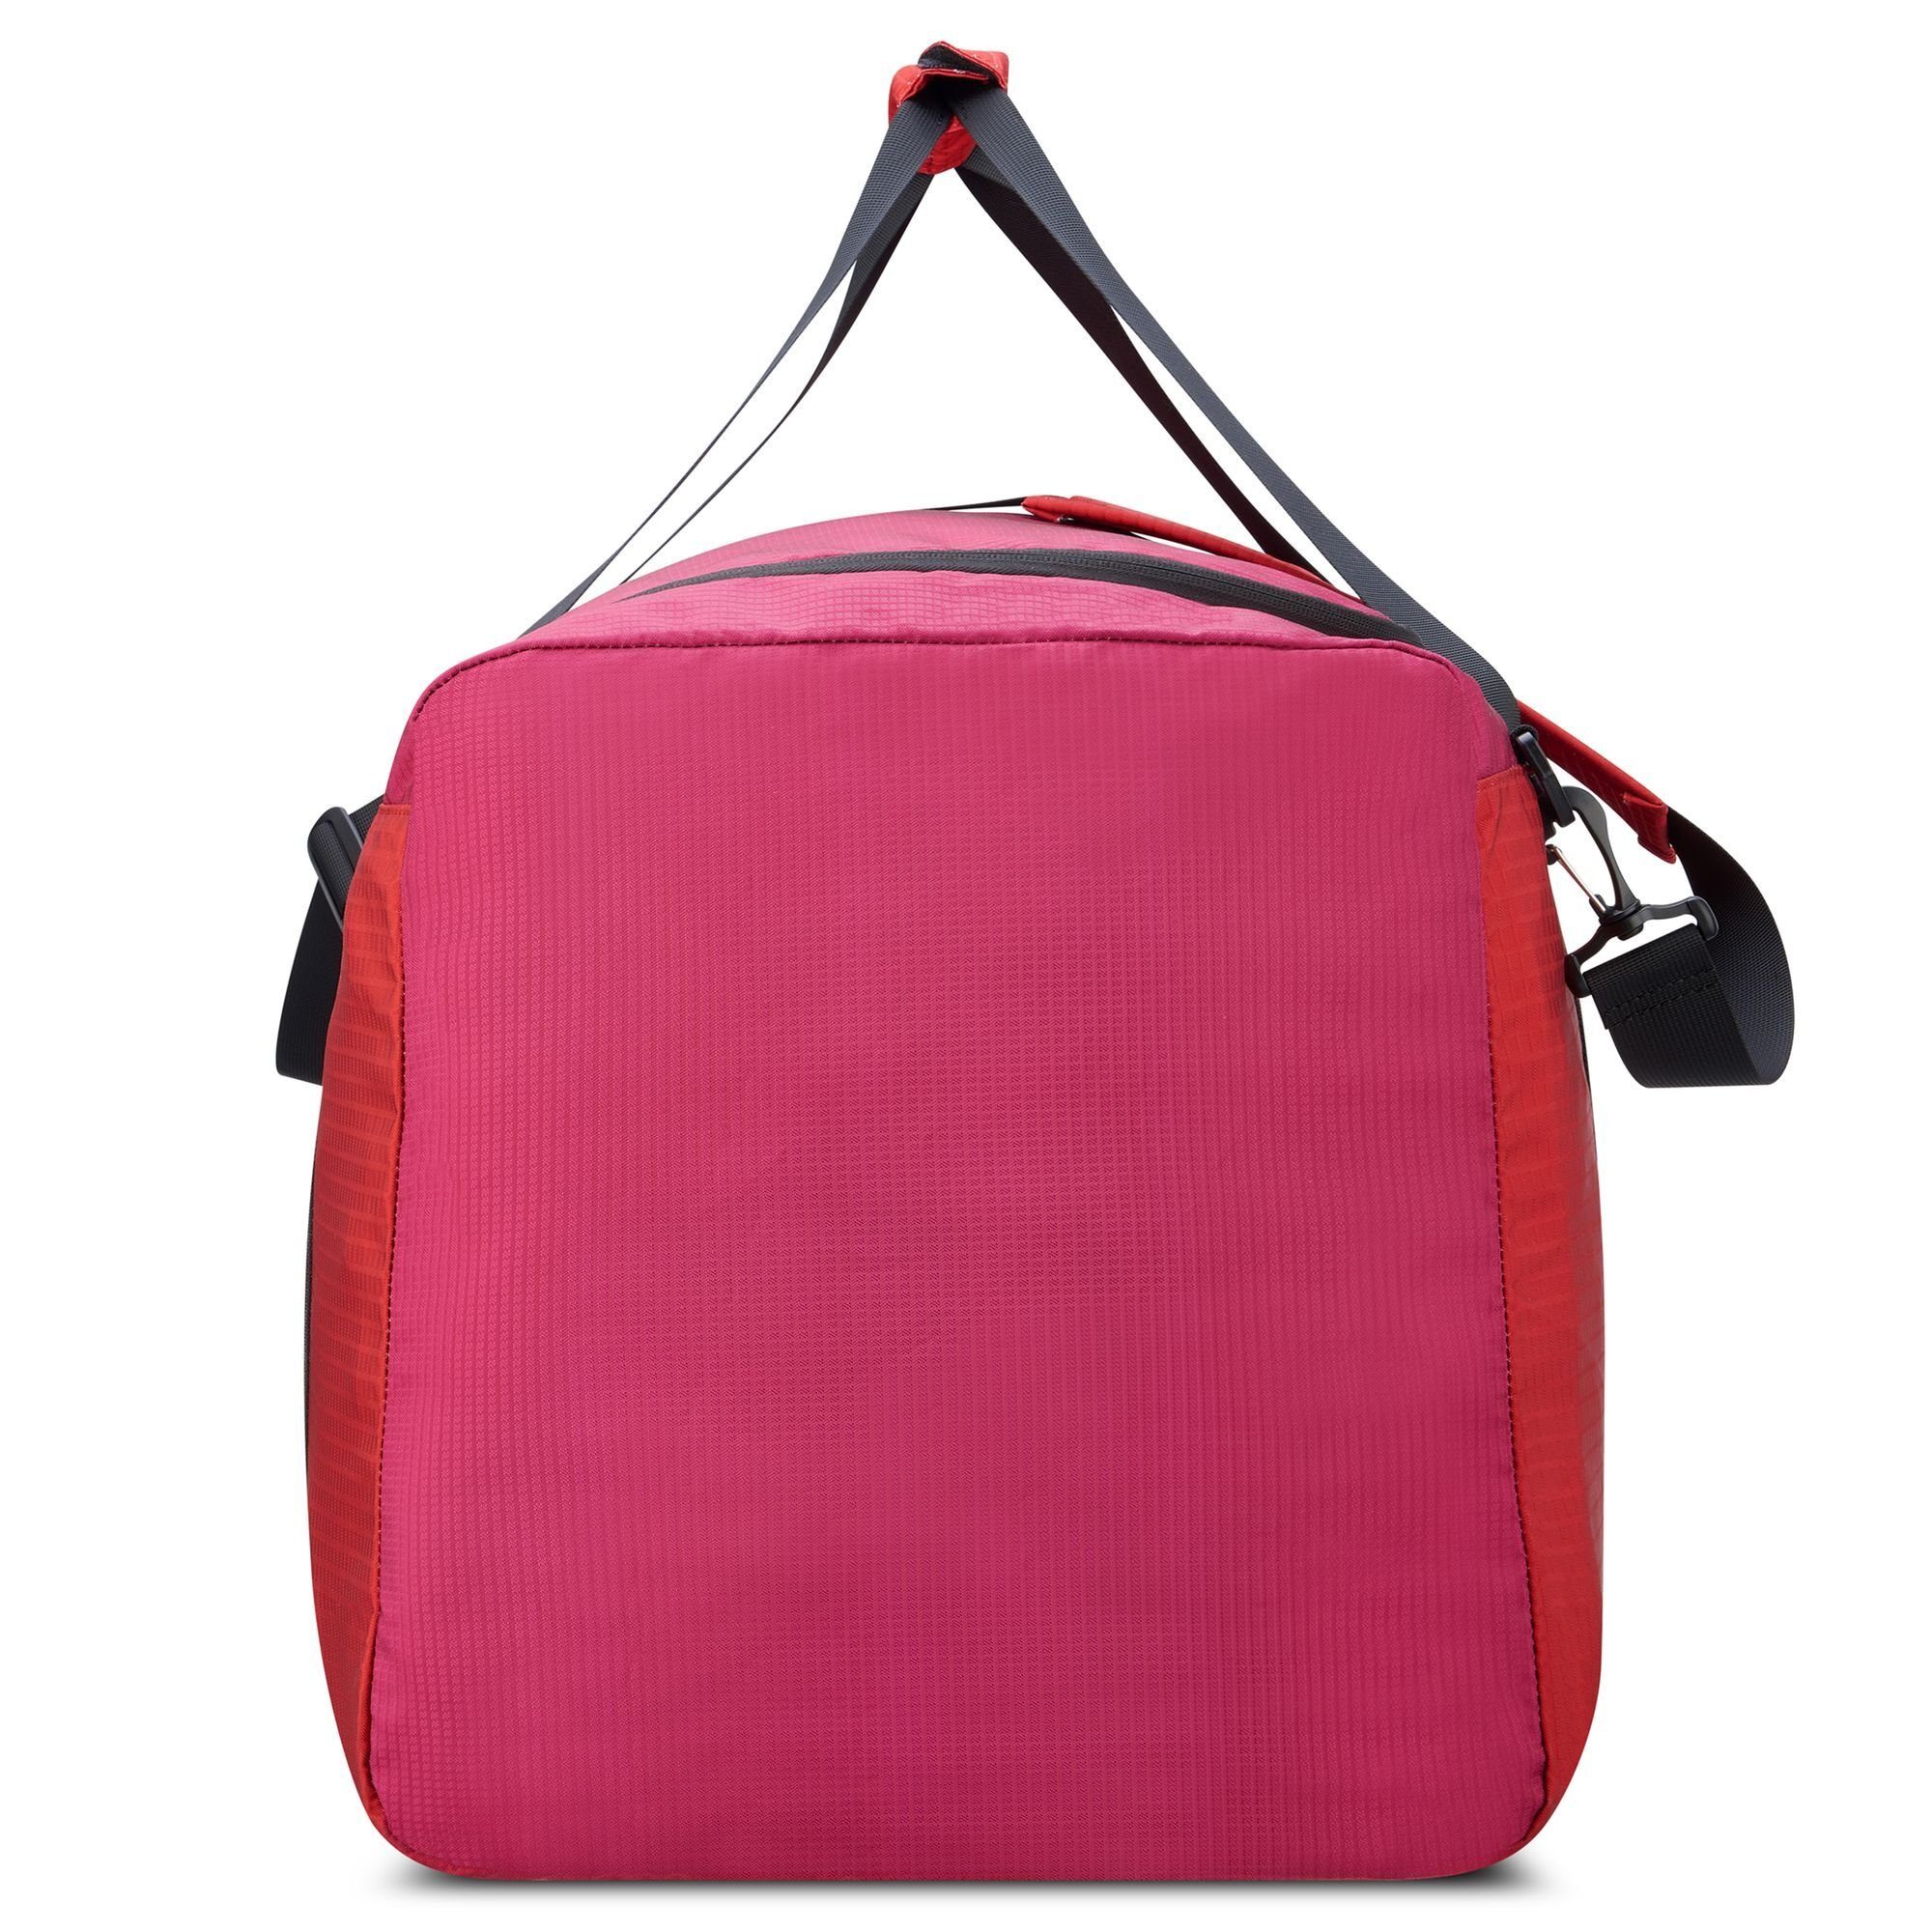 Polyester Delsey Reisetasche paonie Nomade,